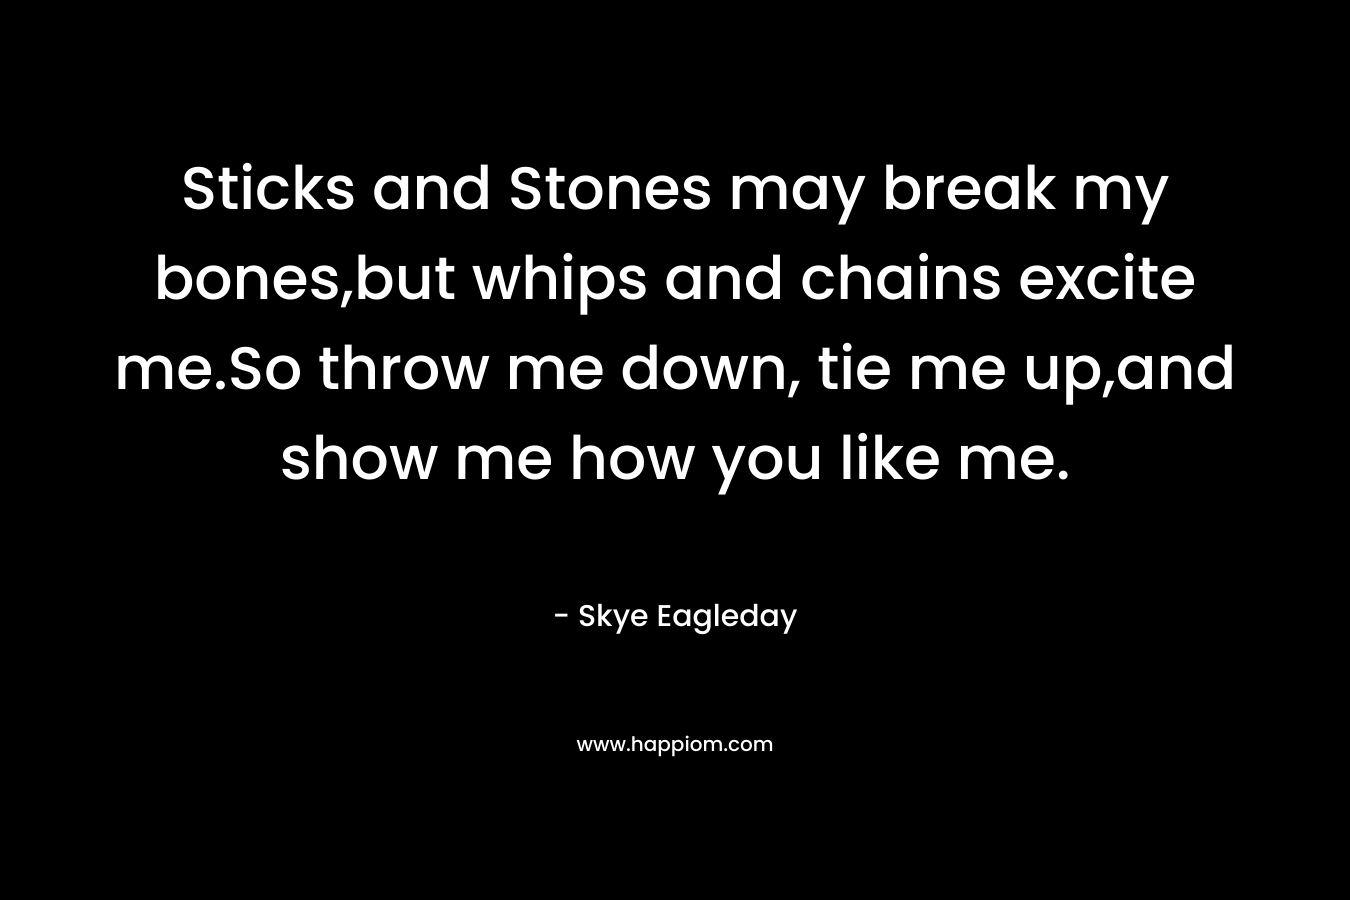 Sticks and Stones may break my bones,but whips and chains excite me.So throw me down, tie me up,and show me how you like me. – Skye Eagleday